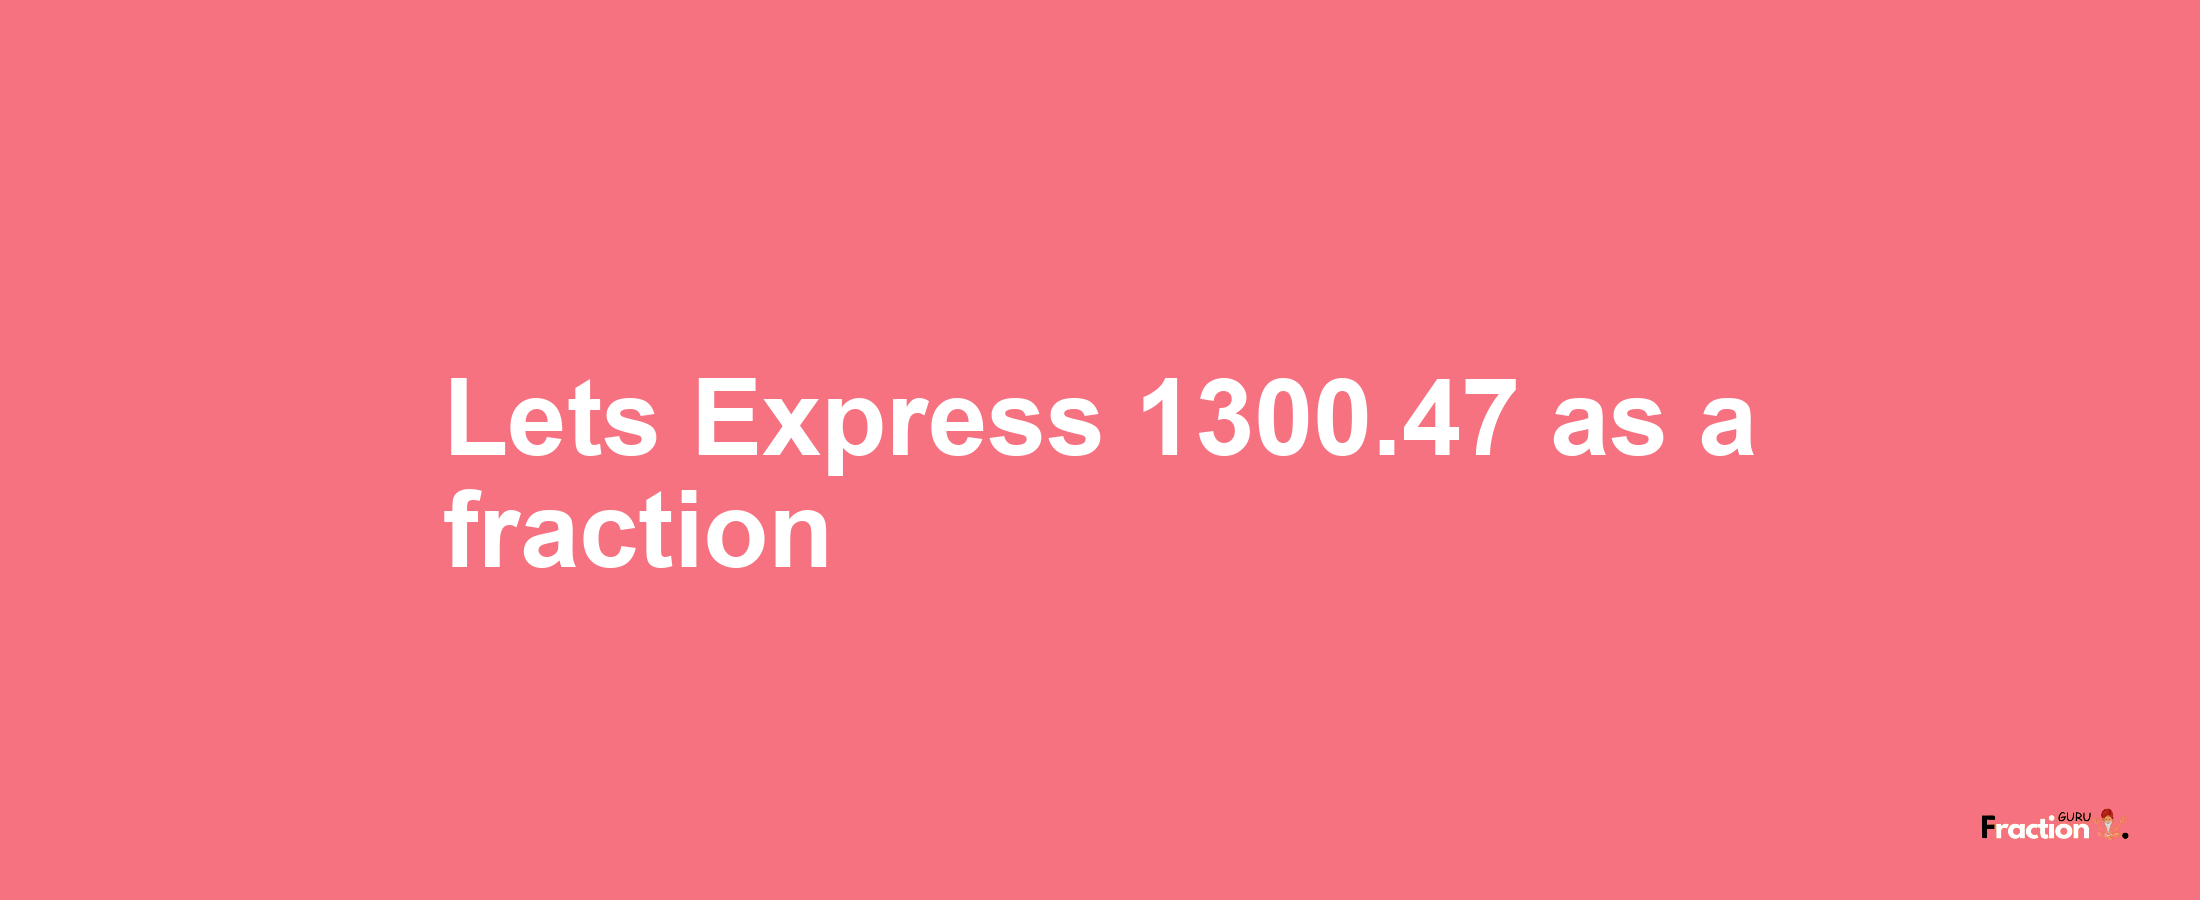 Lets Express 1300.47 as afraction